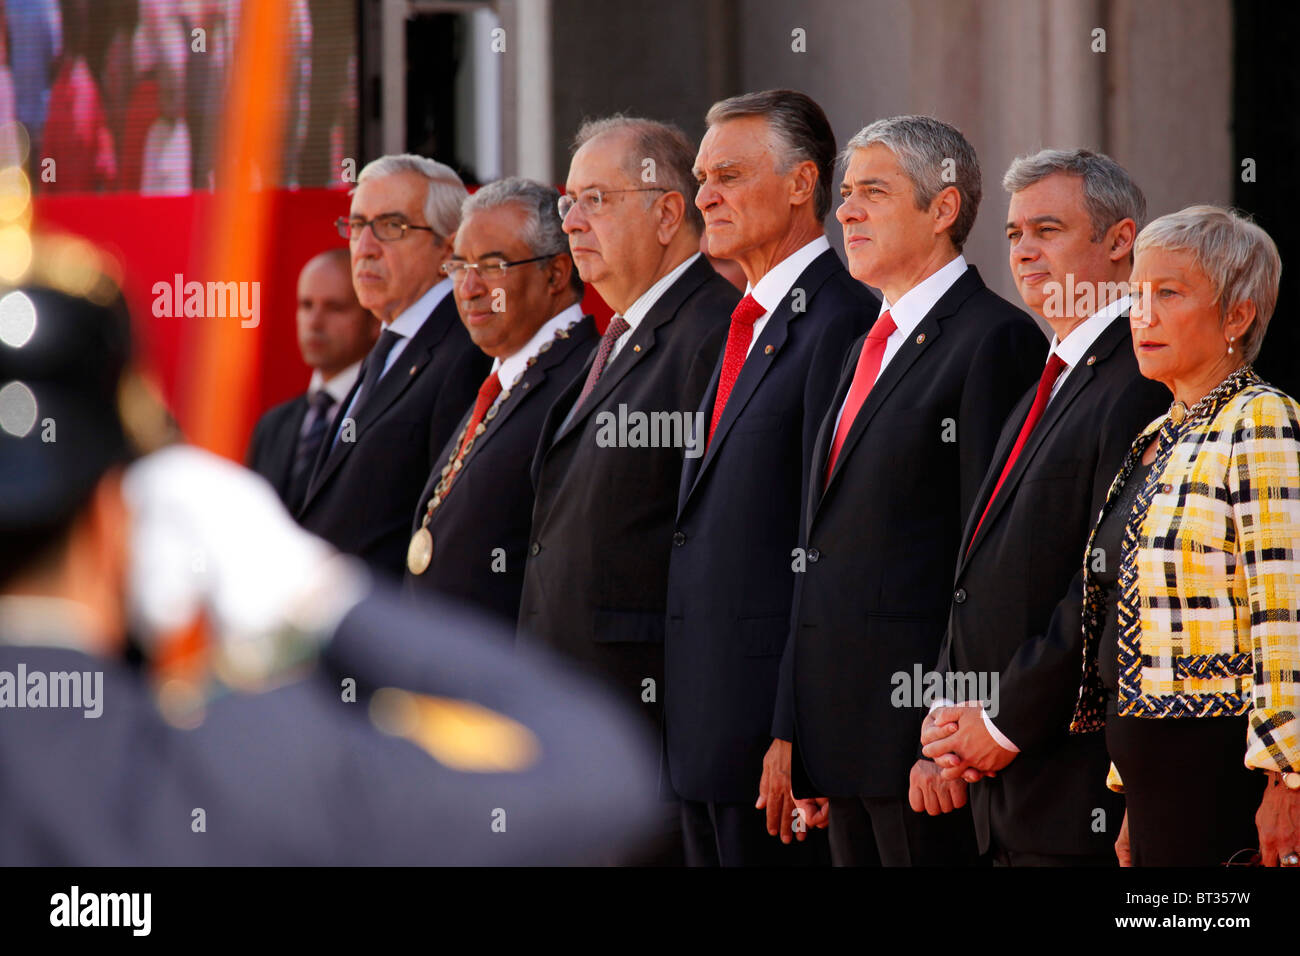 Dignitaries including Cavao Silva, the Portuguese President (4th from right), and Jose Socrates, the Portuguese Prime Minister. Stock Photo